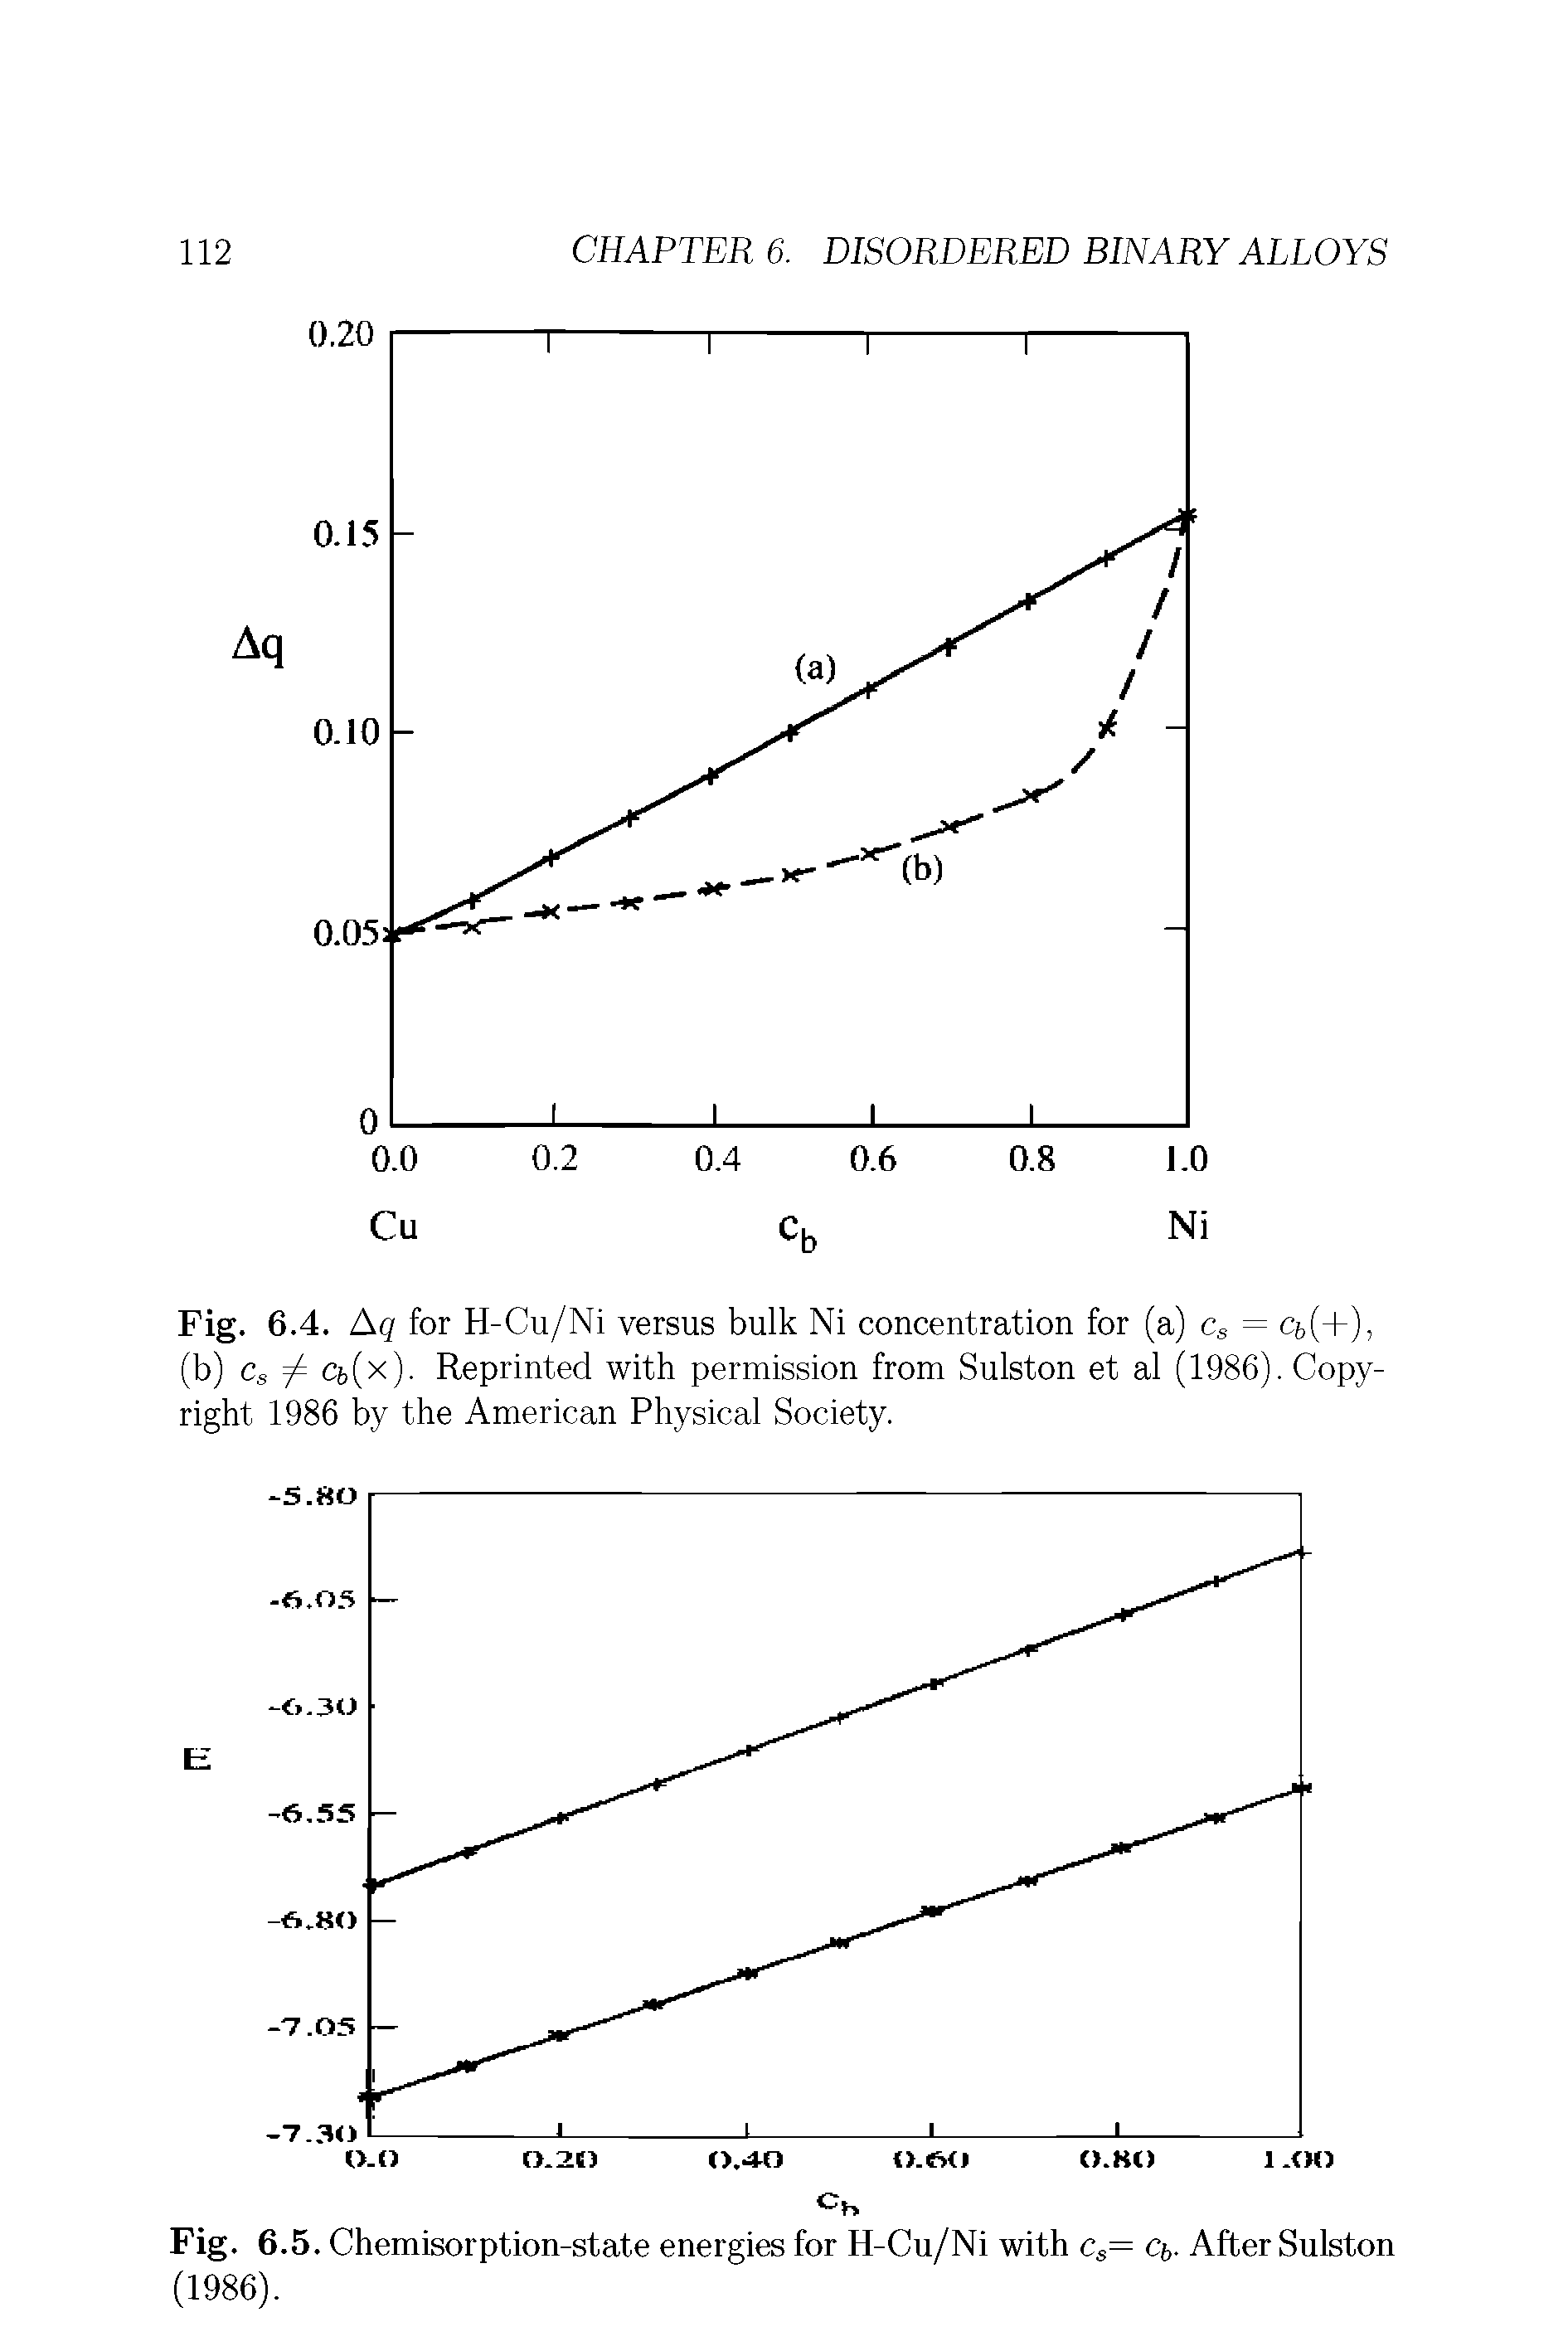 Fig. 6.5. Chemisorption-state energies for H-Cu/Ni with cs= Cb. After Sulston (1986).